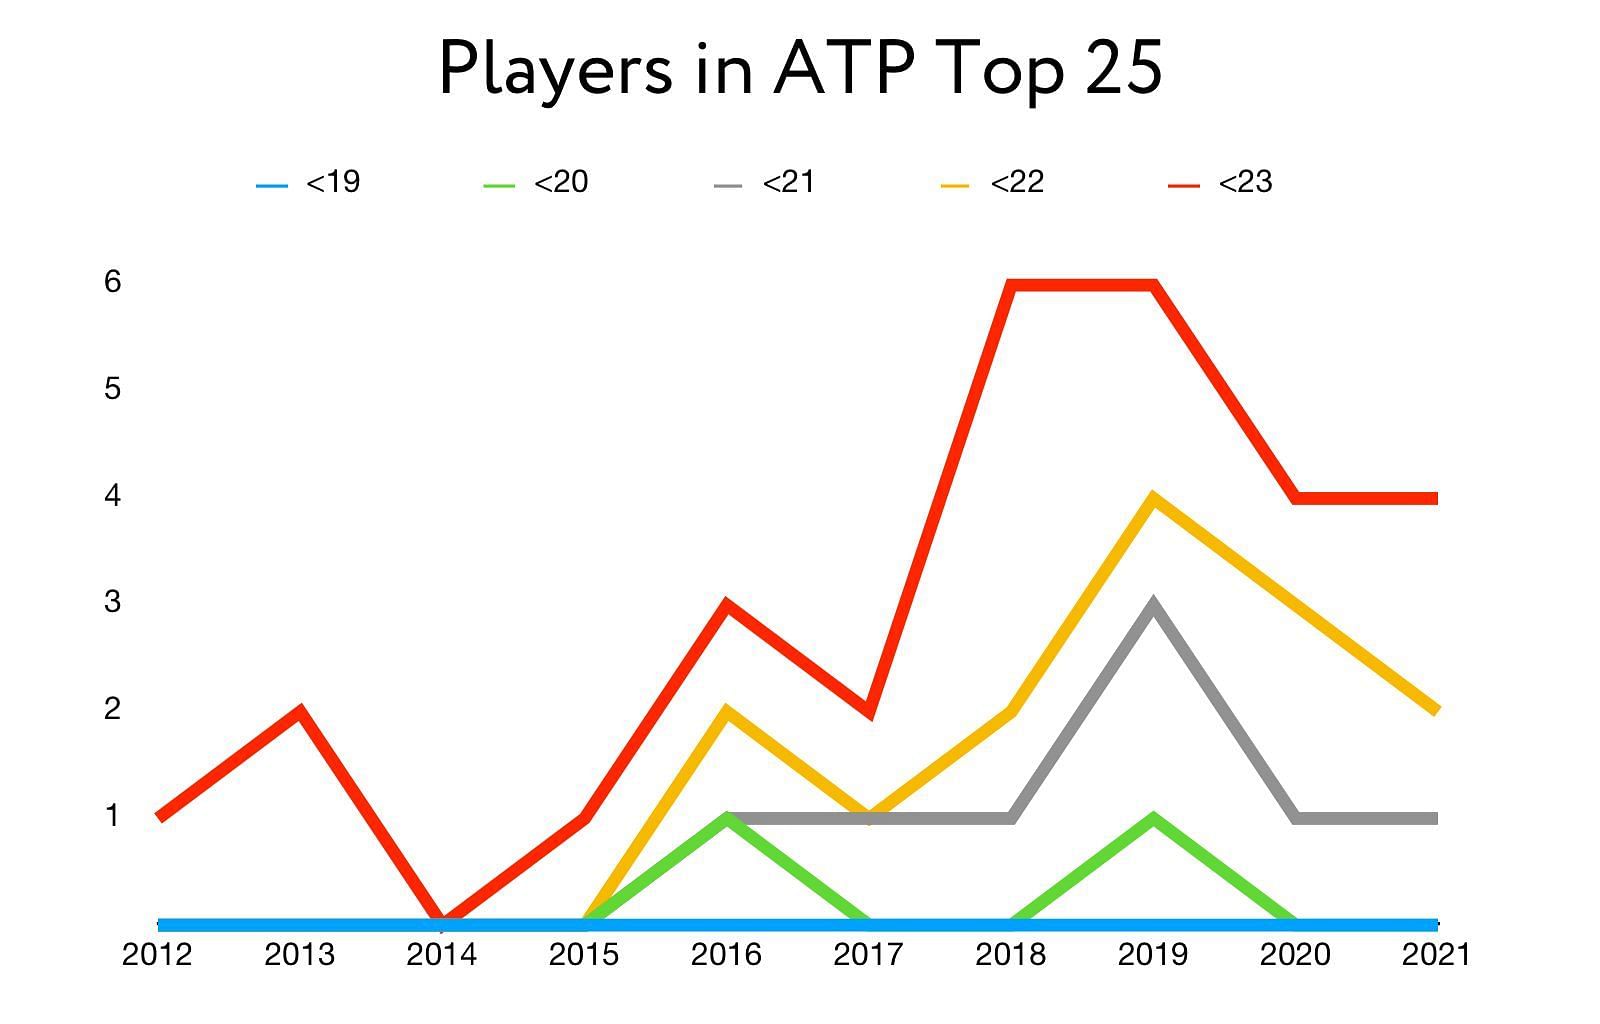 Top 25 players ranking distribution by age (under 23)